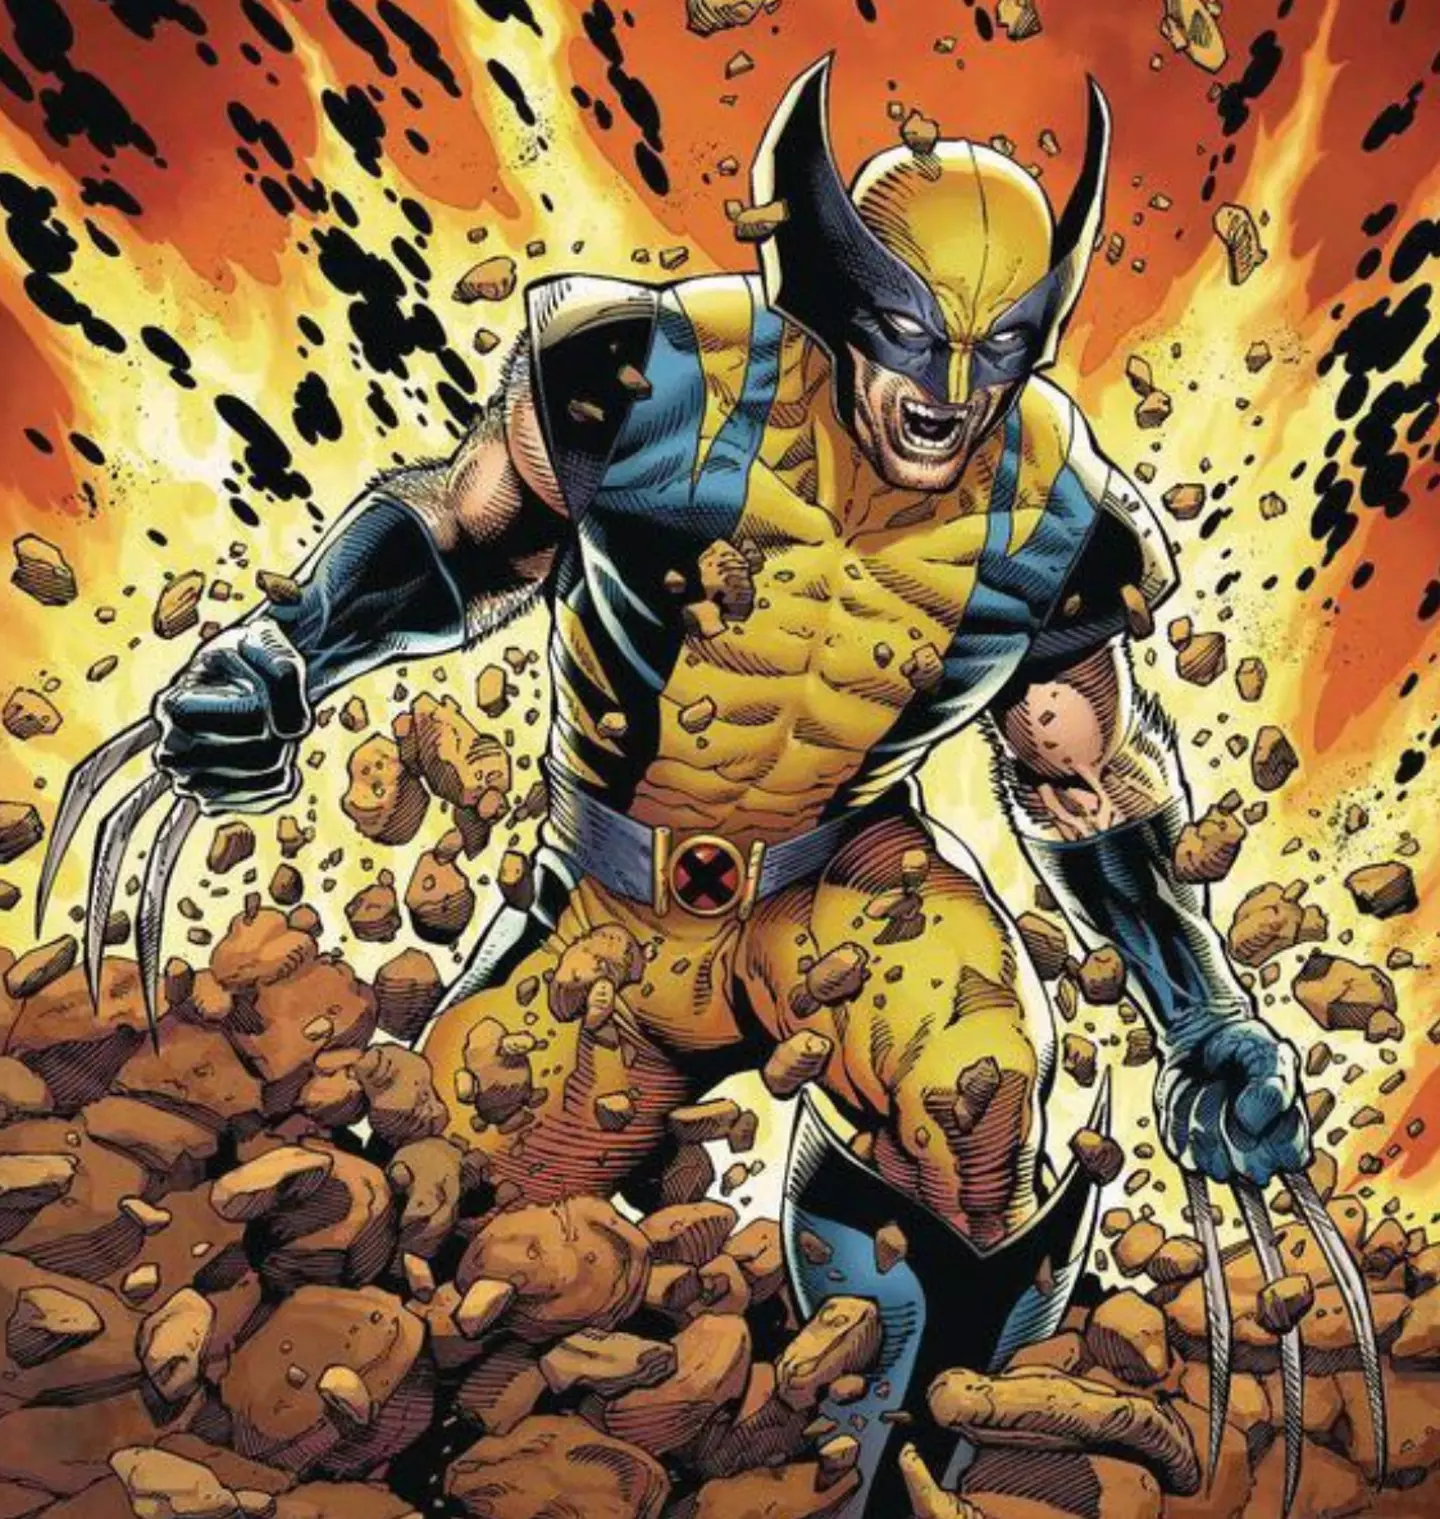 Wolverine's new suit is slightly different to his original one from the comic books.